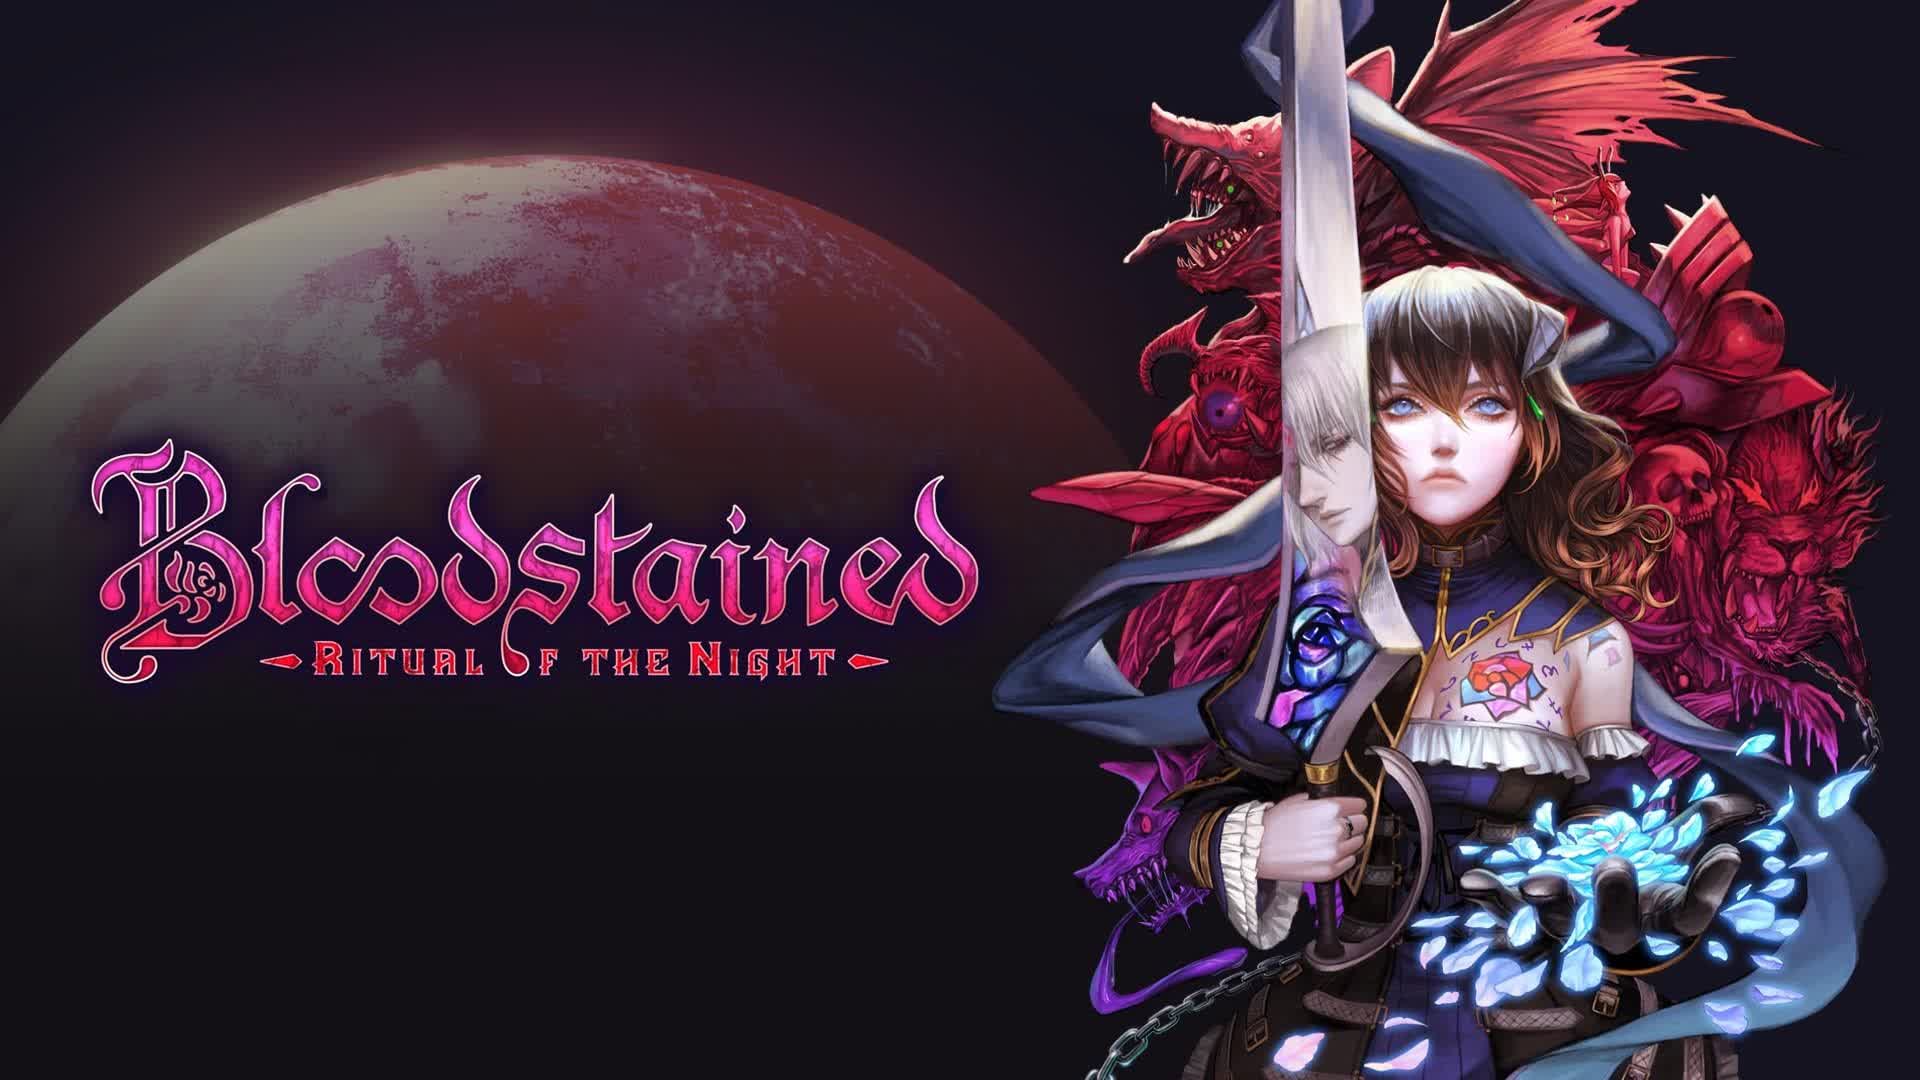 Bloodstained: Ritual of the Night is coming to Android and iOS